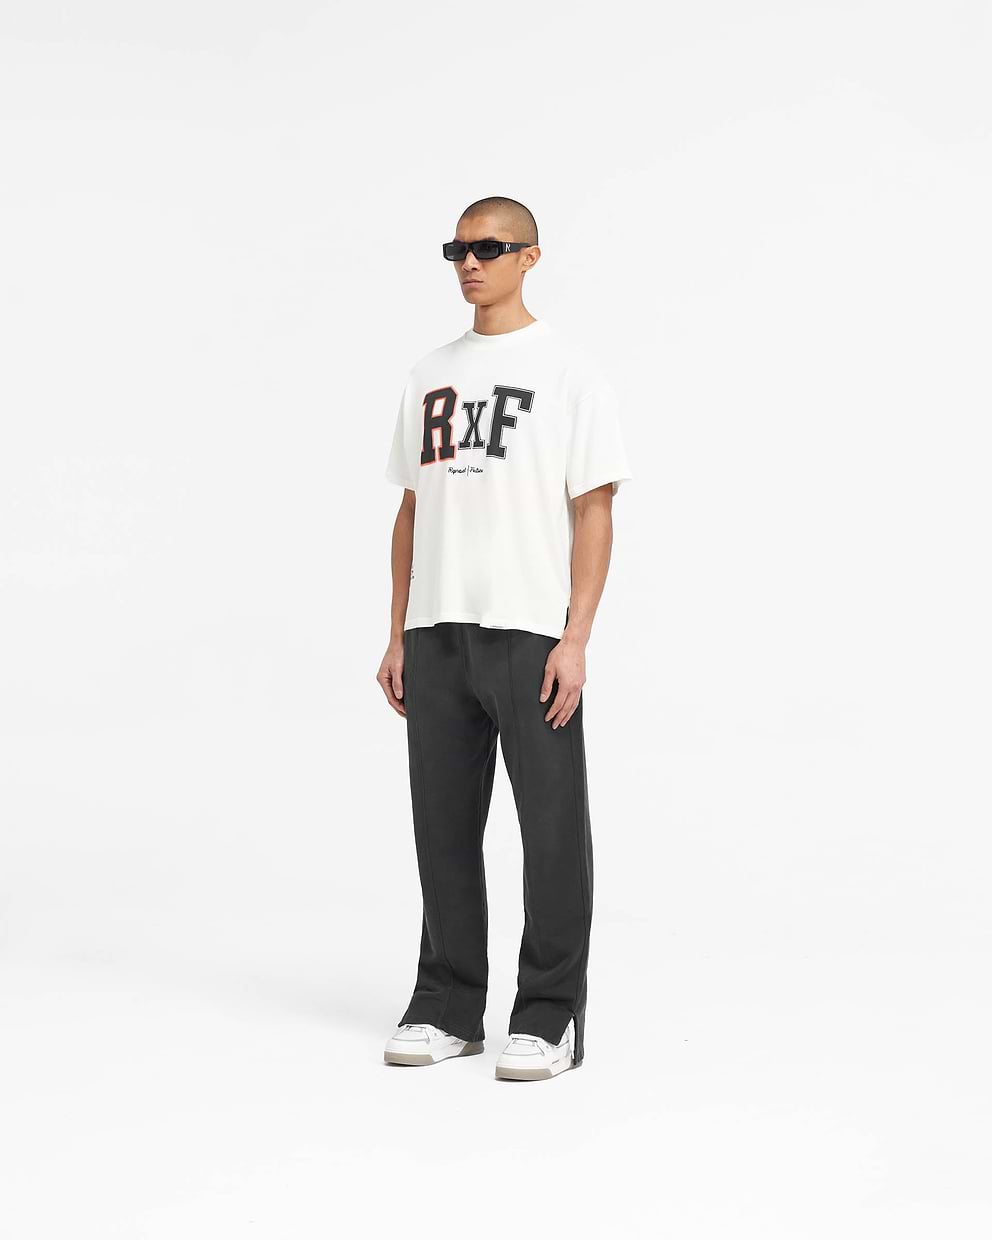 Represent X Feature Champions T-Shirt - Flat White